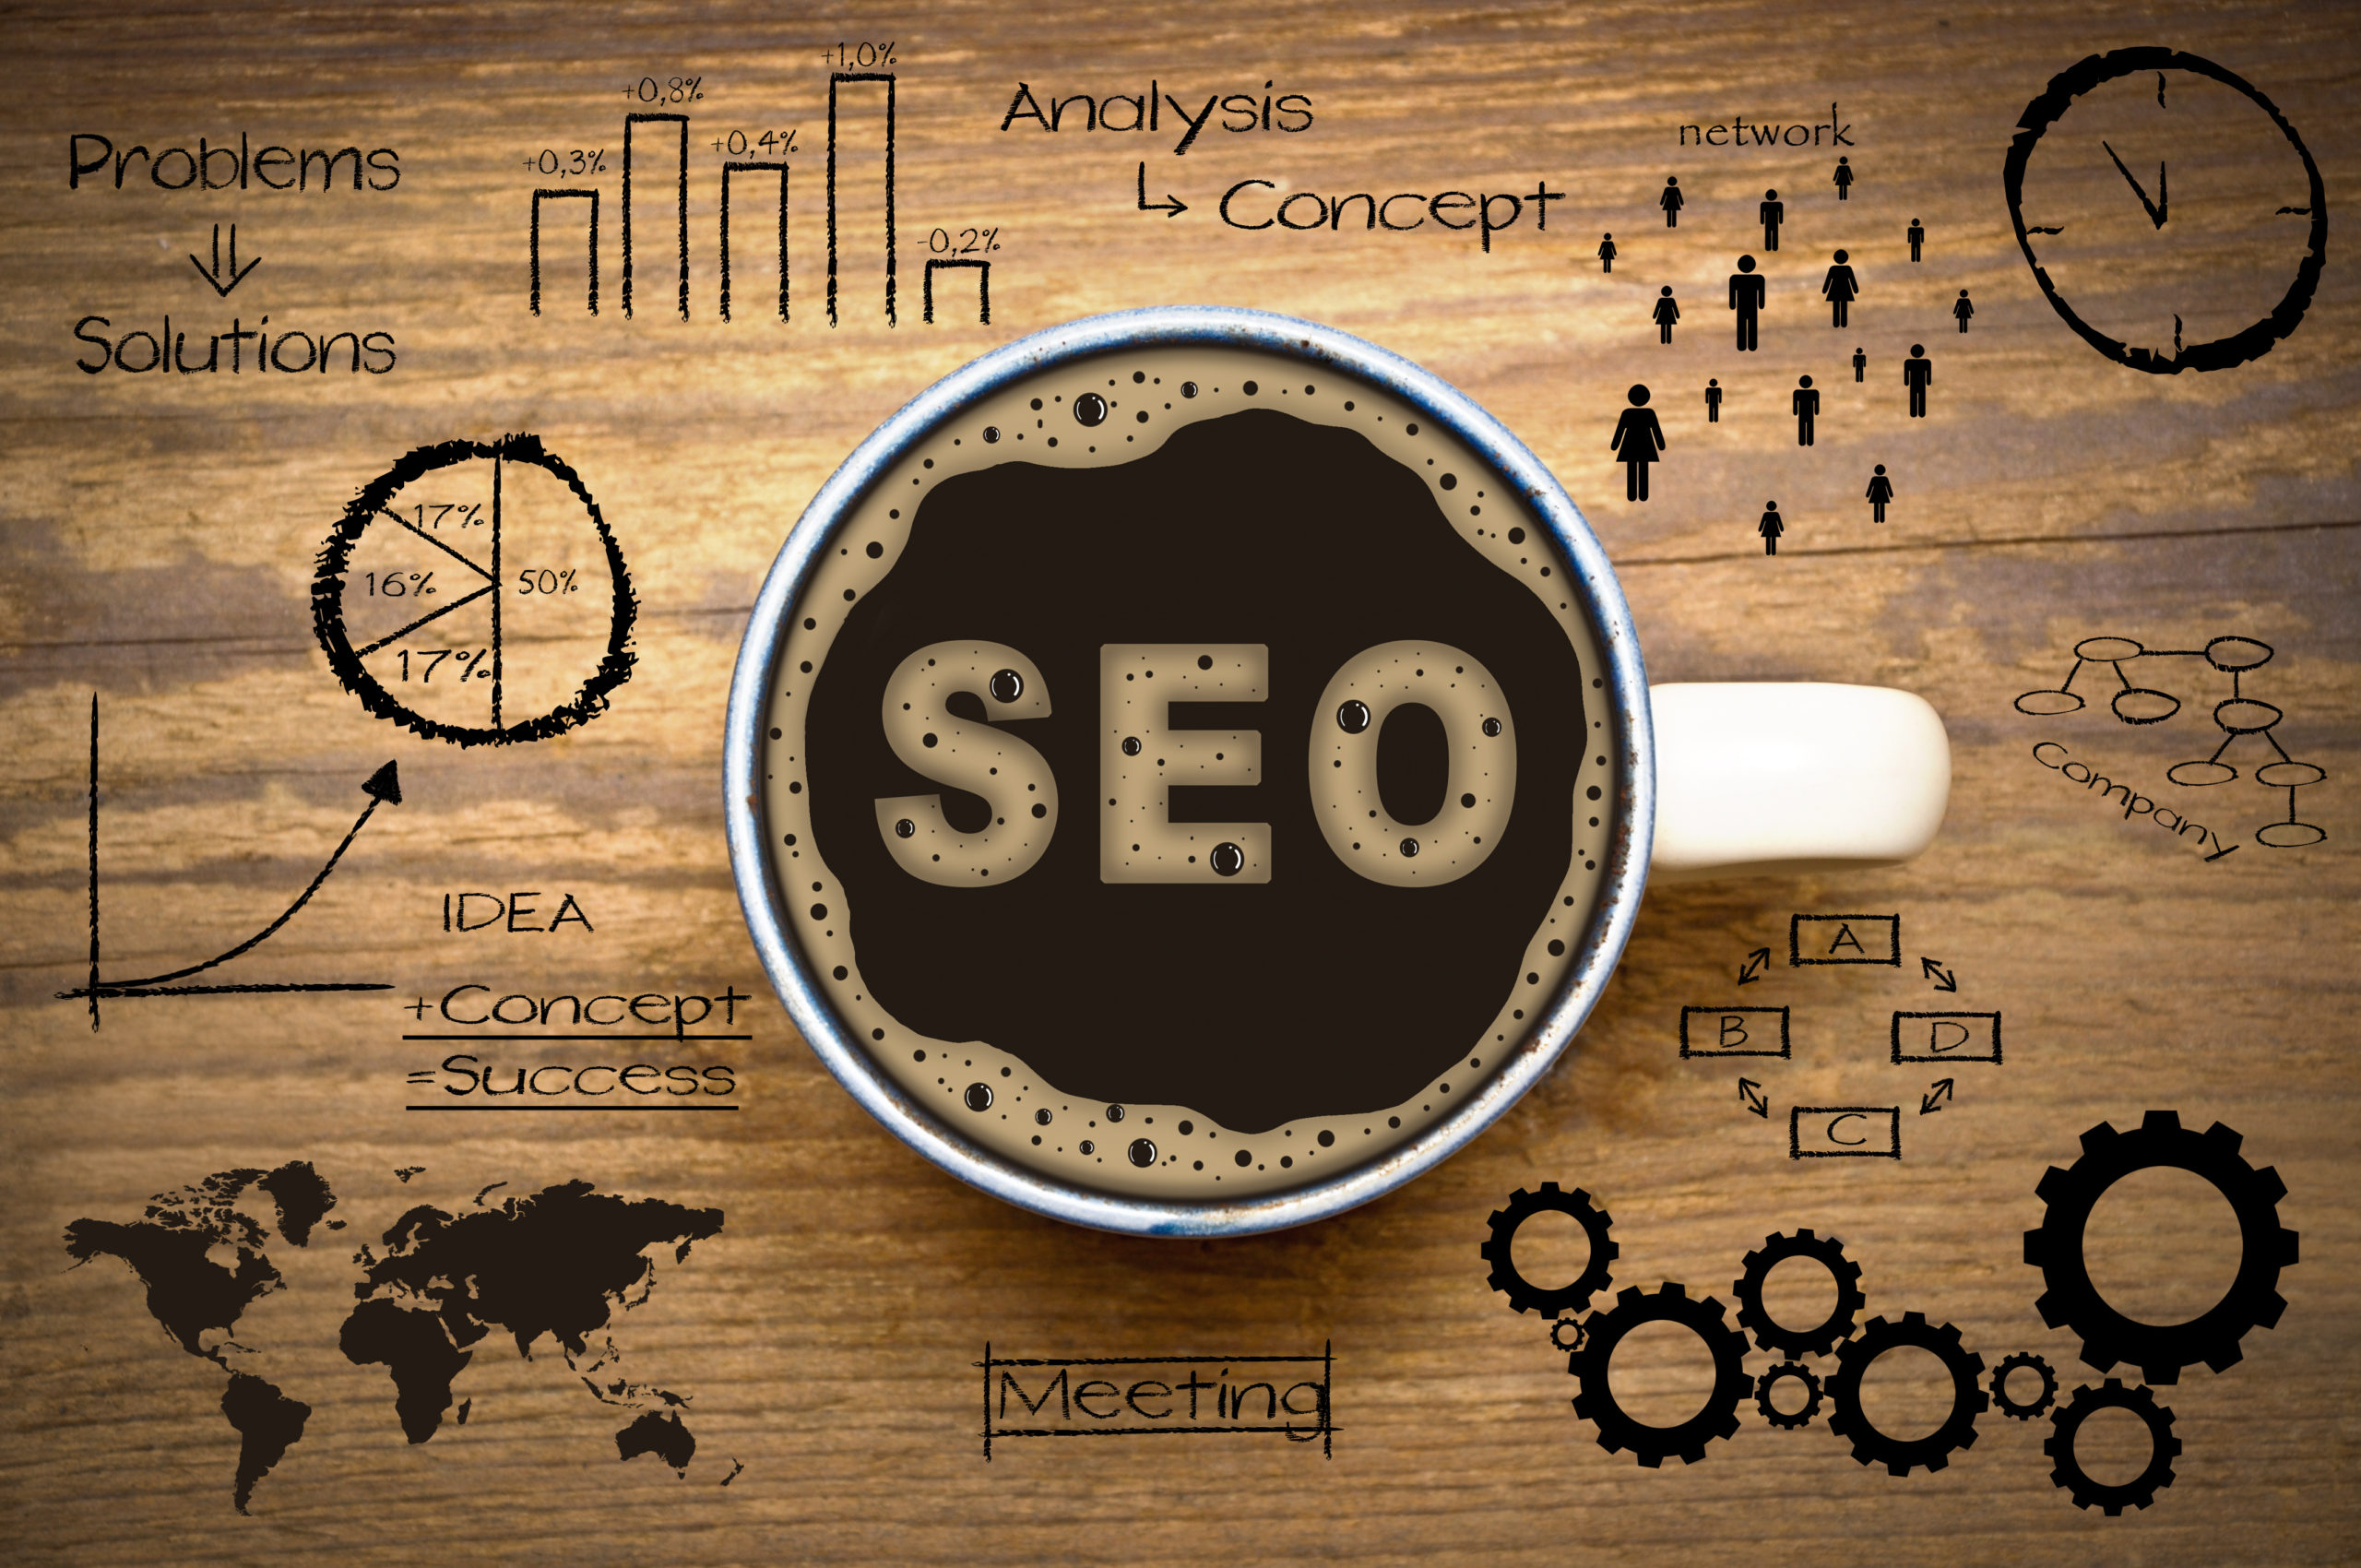 SEO for Your Small Business